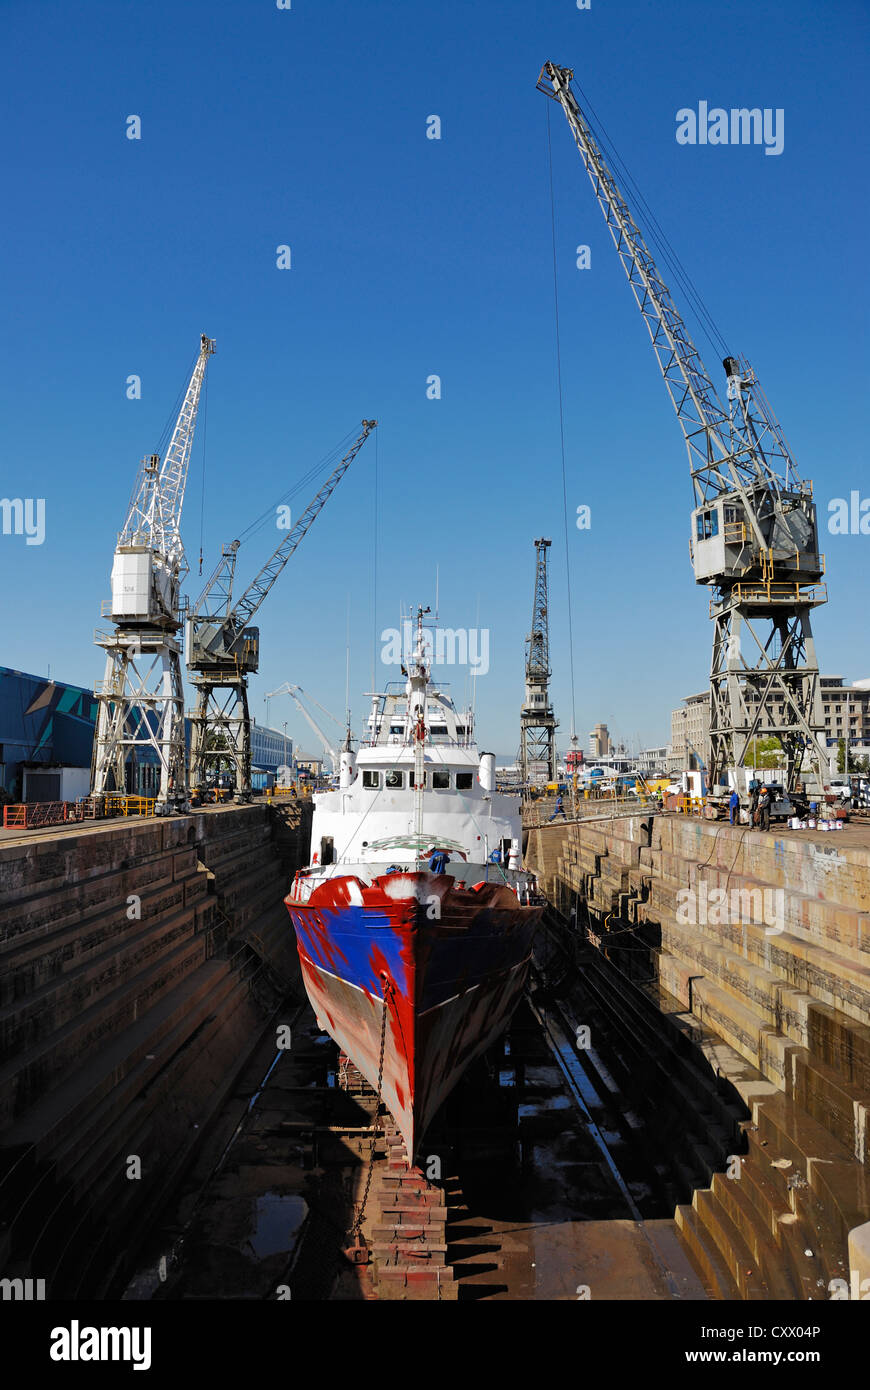 Ship being repaint in a dry dock, Cape Town, South Africa Stock Photo